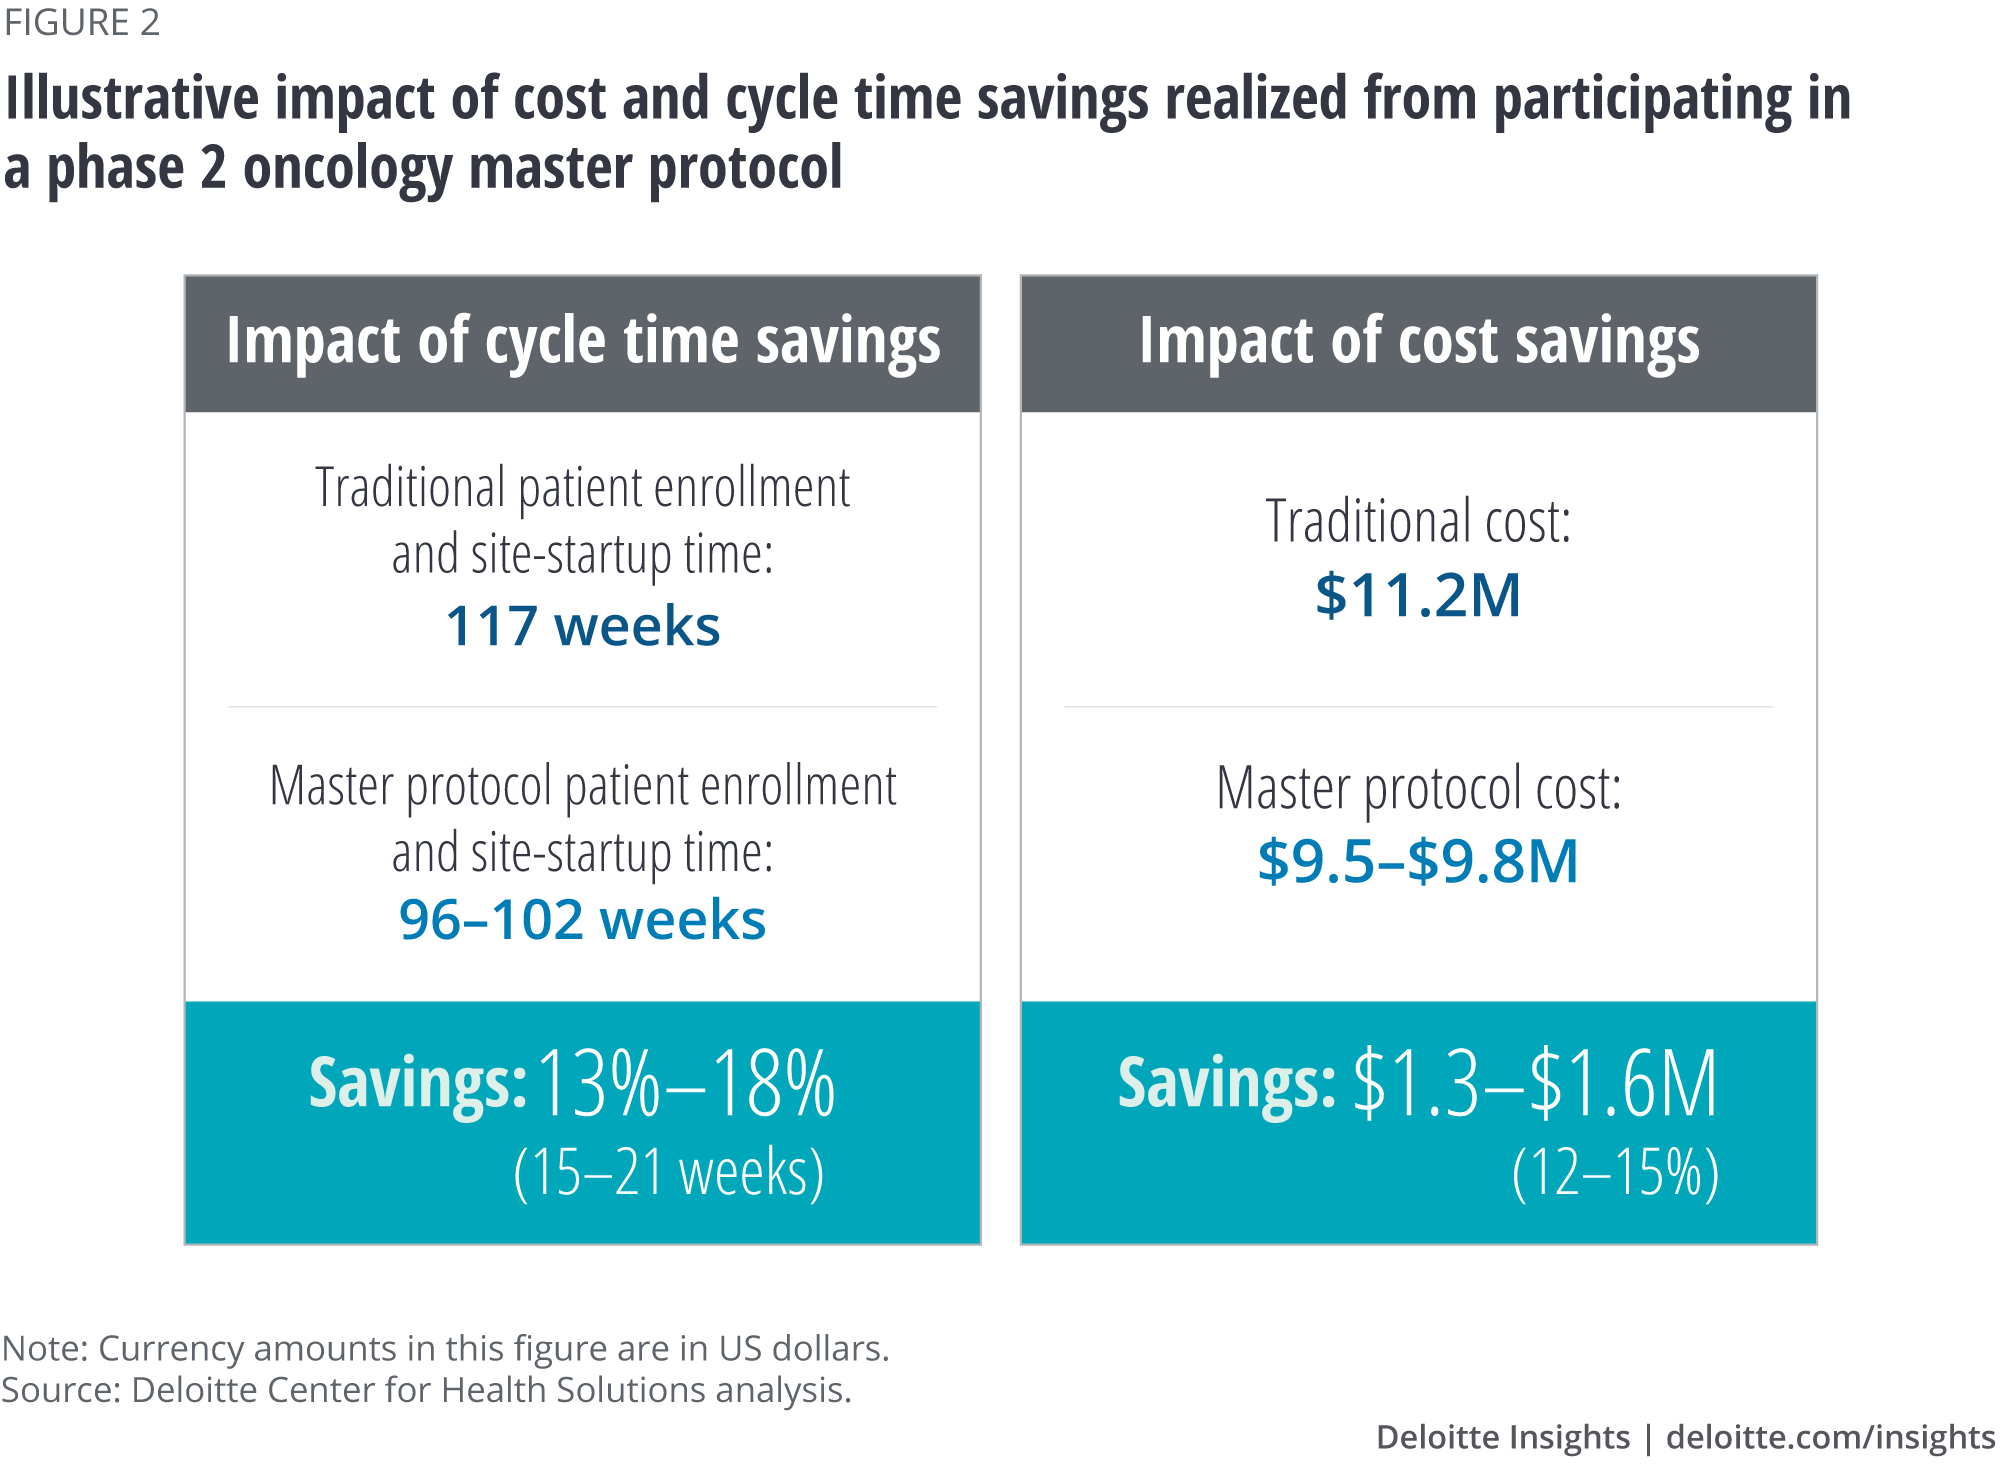 Illustrative impact of cost and cycle time savings realized from participating in a phase 2 oncology master protocol